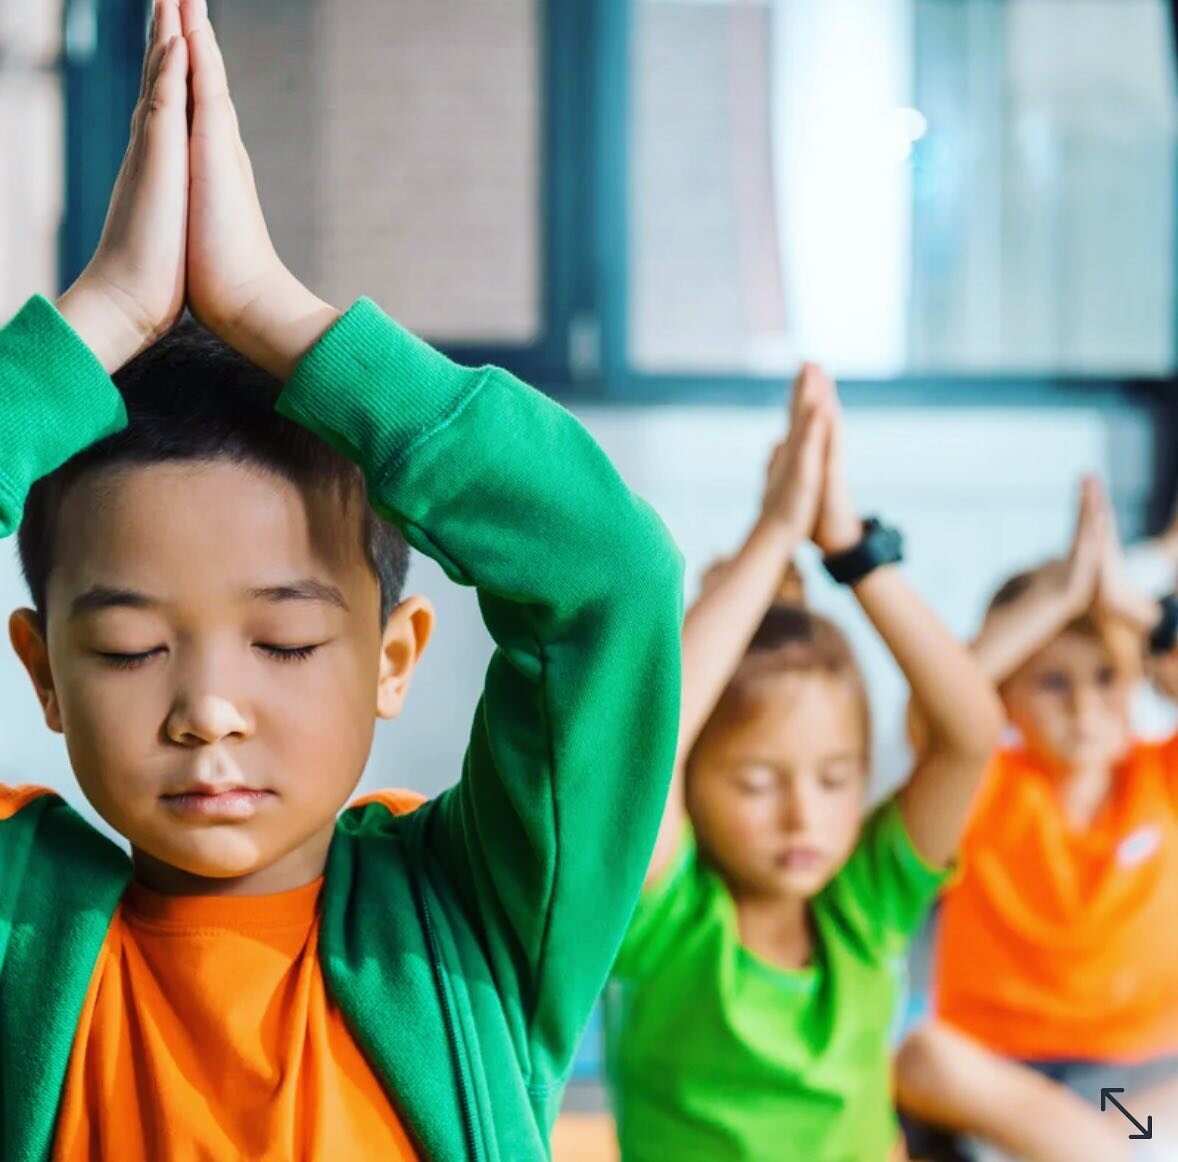 🚨&rdquo;Why Kids Need Yoga As Much As We Do!&rdquo; article in the Yoga Journal states many things we share in our classes‼️

🧘&zwj;♀️Stillness, balance, focus, peace, grace, connection, compassion for self &amp; others are just a FEW things kids w